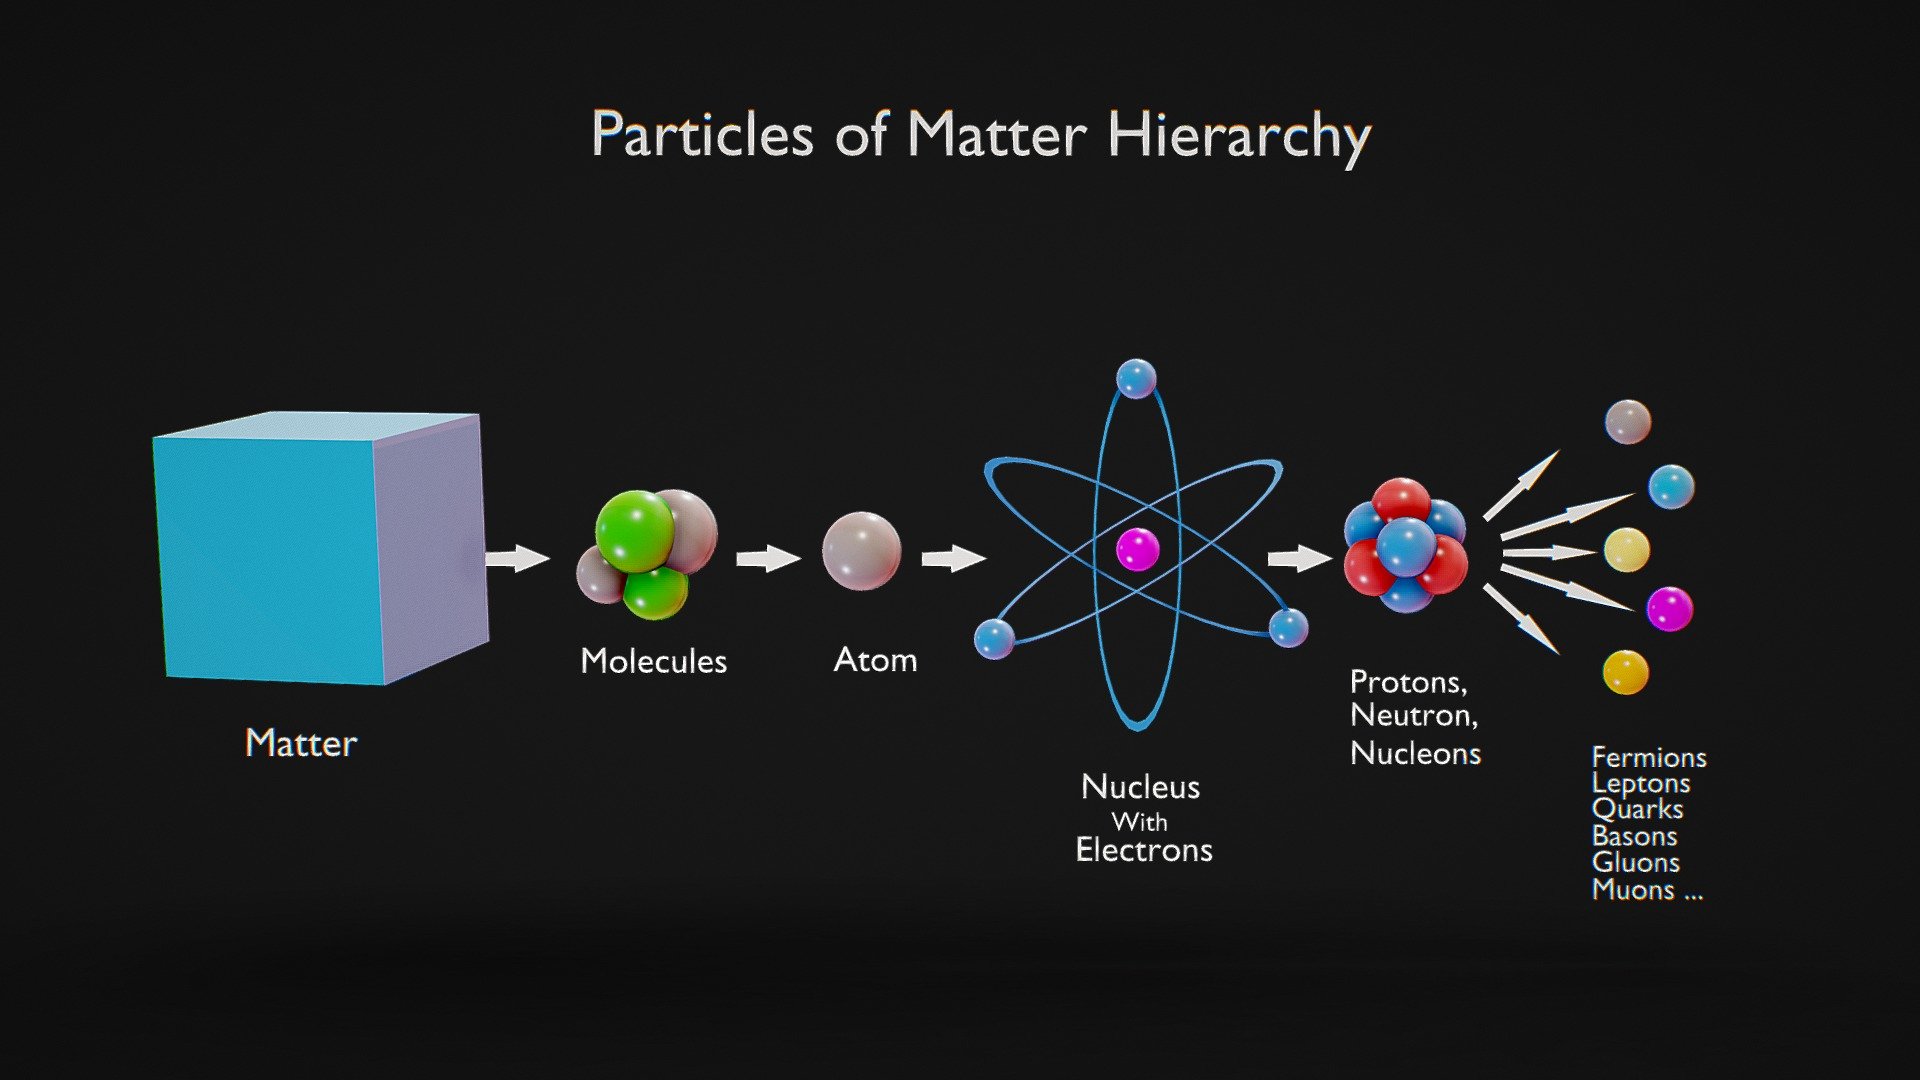 Particles Hierarchy: Atoms to Quarks

The particles hierarchy begins with atoms, which are the fundamental units of matter, consisting of protons, neutrons, and electrons. Protons and neutrons are composed of even smaller particles called quarks, specifically up and down quarks, which are the most elementary constituents of matter known to date. This hierarchical structure showcases the remarkable complexity of the subatomic world, with quarks serving as the building blocks of protons, neutrons, and ultimately, all matter in the universe.




Format: FBX, OBJ, MTL, STL, glb, glTF, Blender v3.6.2

Optimized UVs (Non-Overlapping UVs) (Atlas UV)

PBR Textures | 1024x1024 - 2048x2048 - 4096x4096 | (1K, 2K, 4K - Jpeg, Png)

Base Color (Albedo)

Normal Map

AO Map

Metallic Map

Roughness Map

Height Map
 - Particles Hierarchy: Atoms to Quarks - Buy Royalty Free 3D model by Nima (@h3ydari96) 3d model